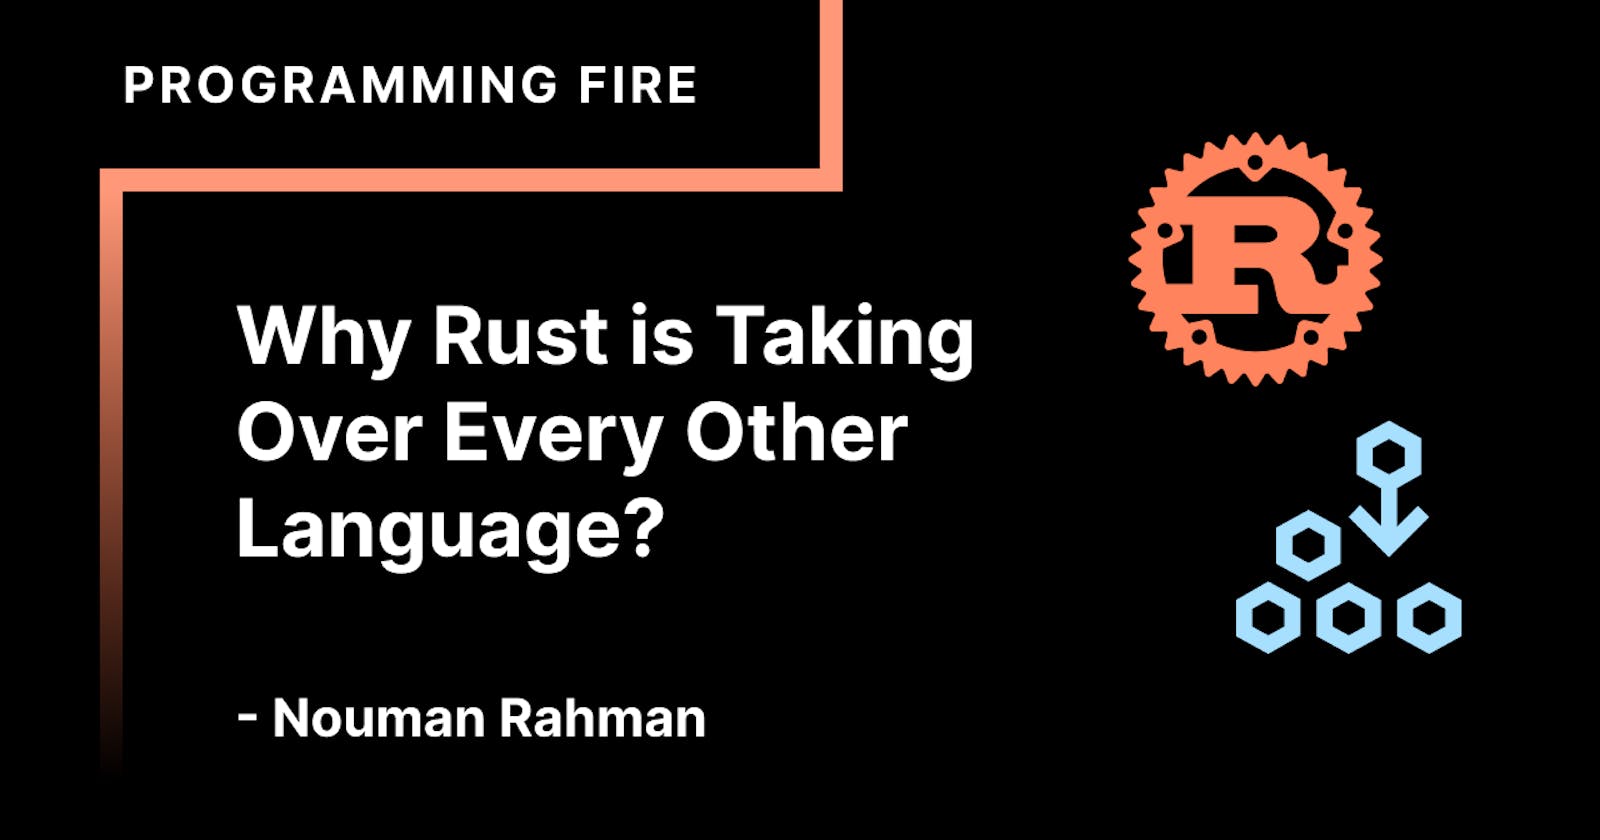 Why Rust is Taking Over Every Other Language?